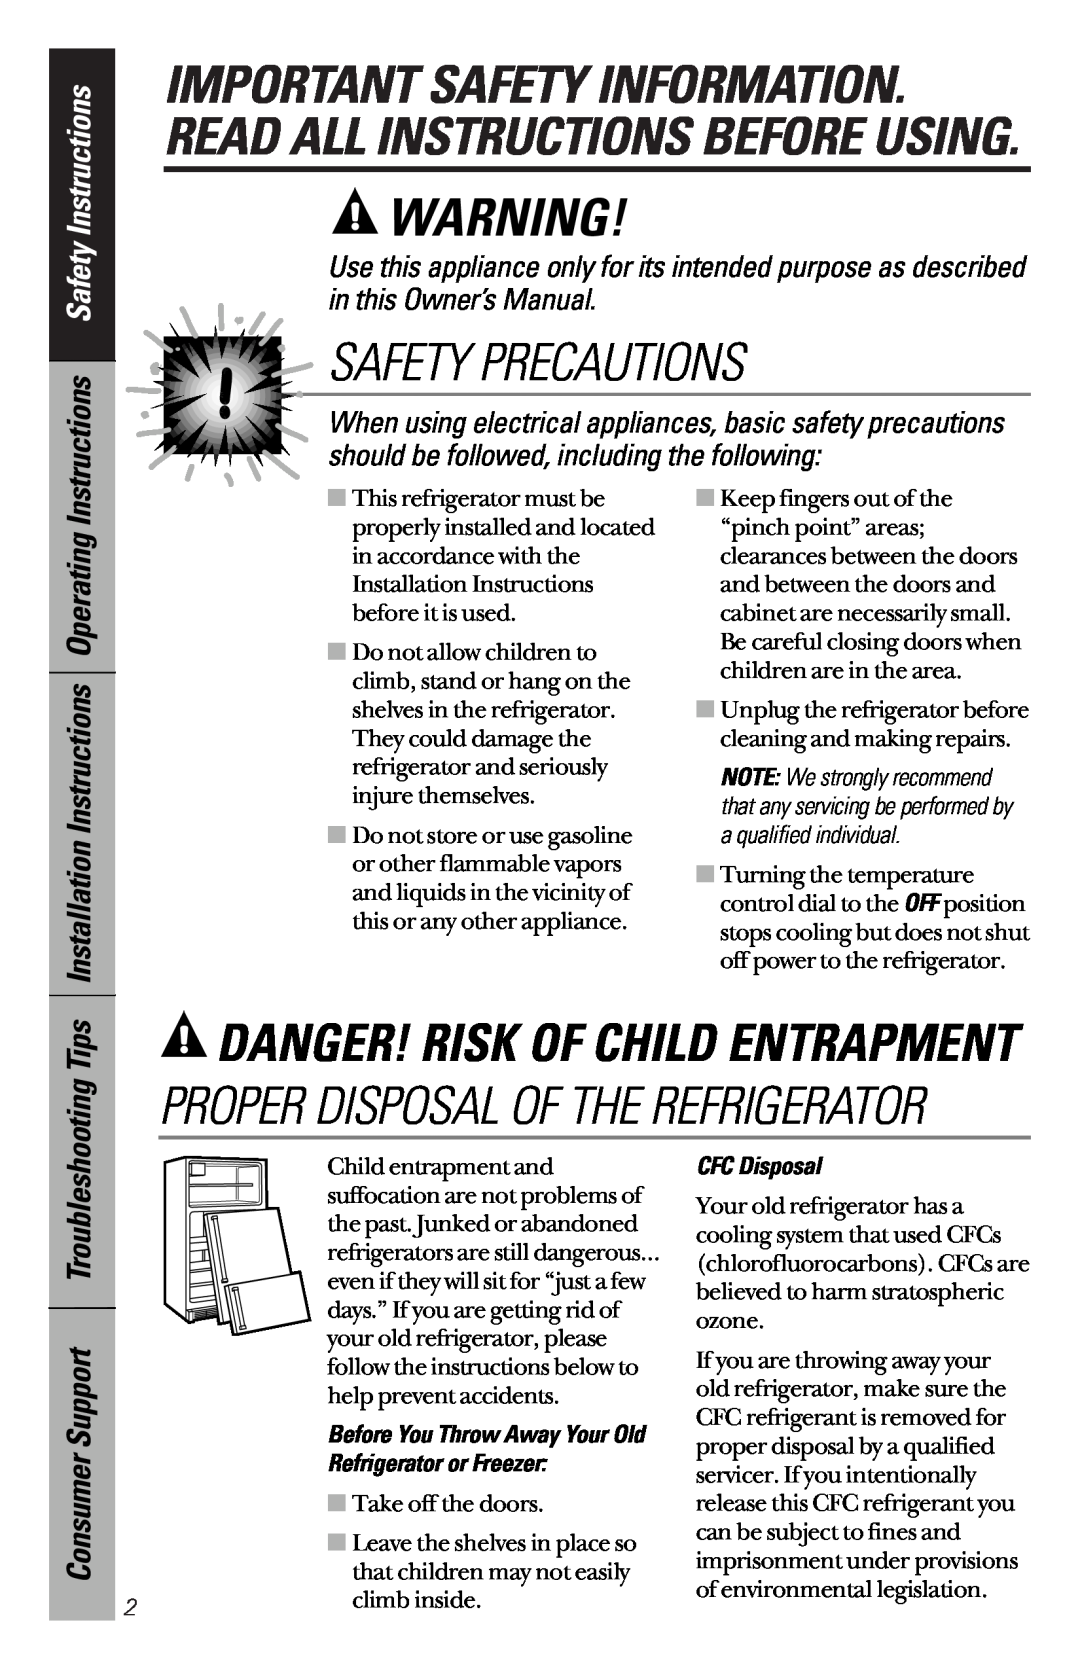 GE 162D9639P003 Safety Precautions, Important Safety Information. Read All Instructions Before Using, Tips, CFC Disposal 